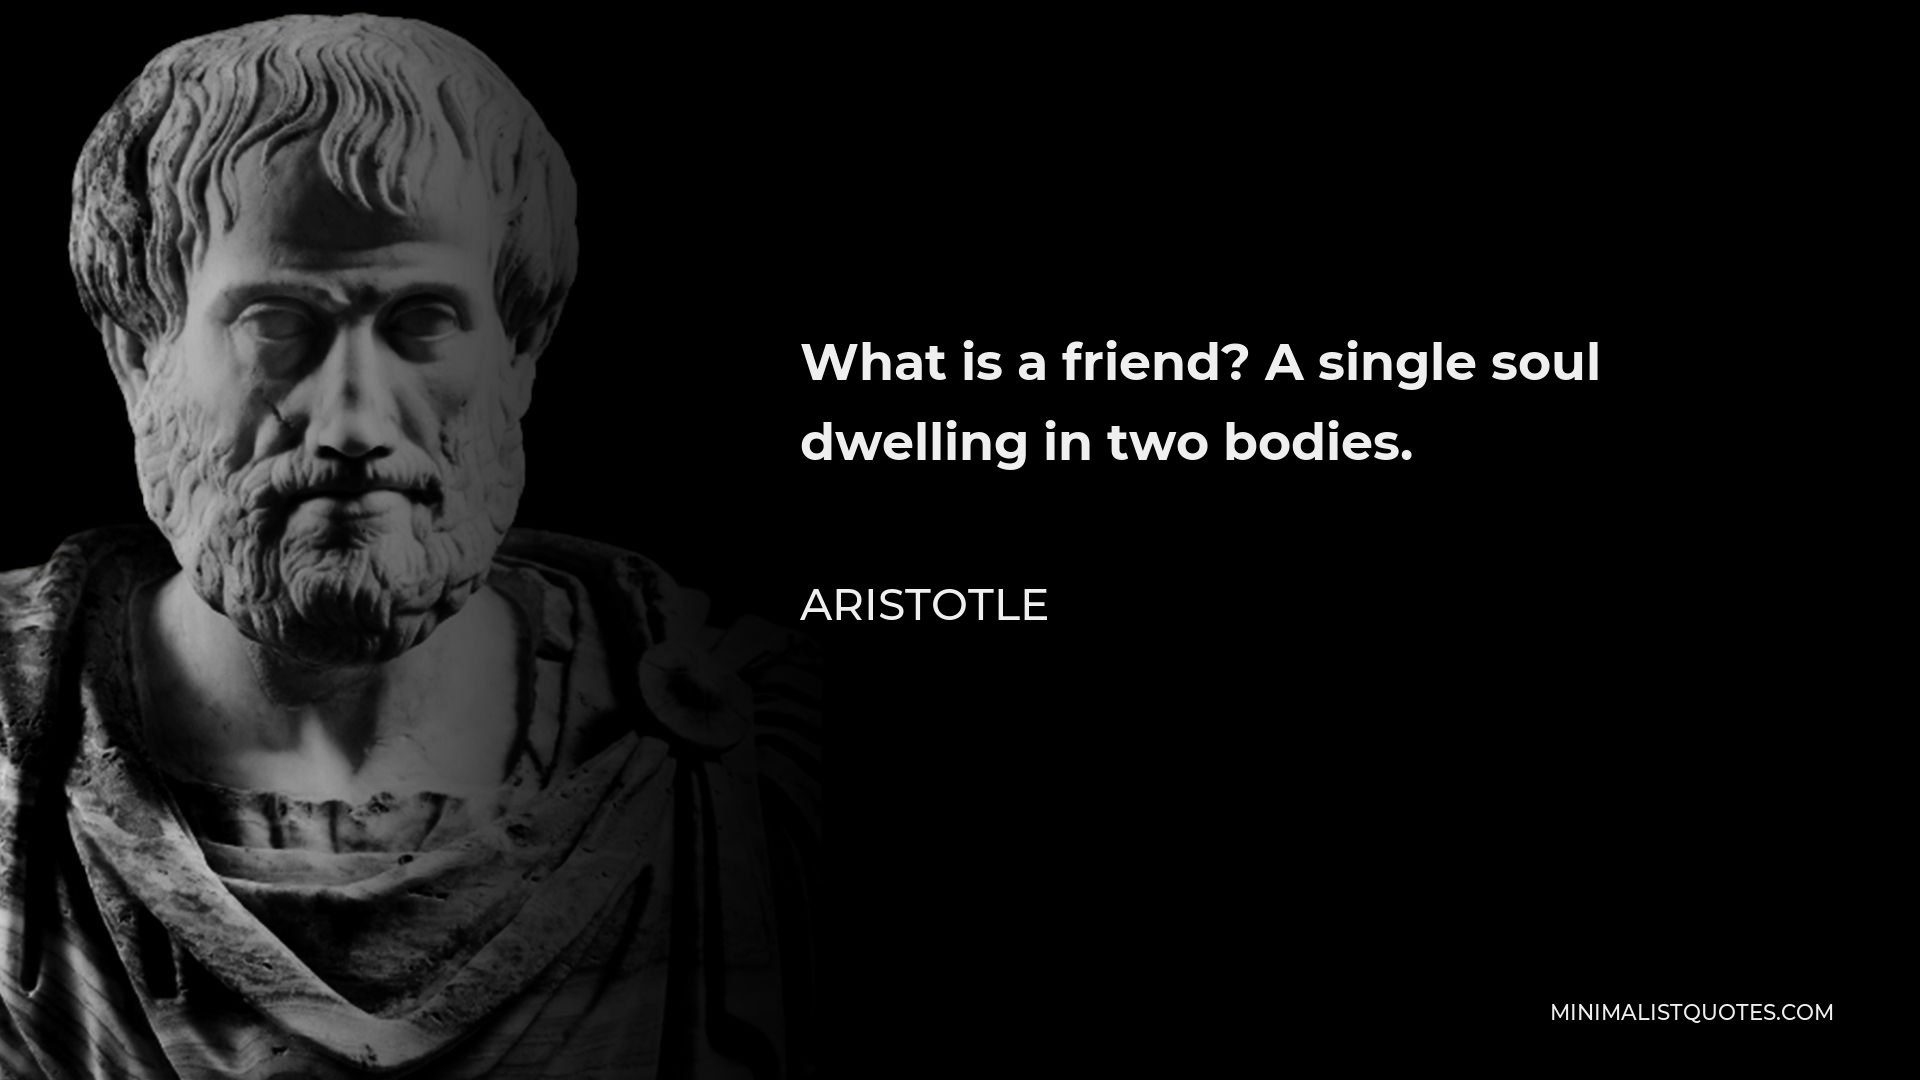 Aristotle Quote - What is a friend? A single soul dwelling in two bodies.